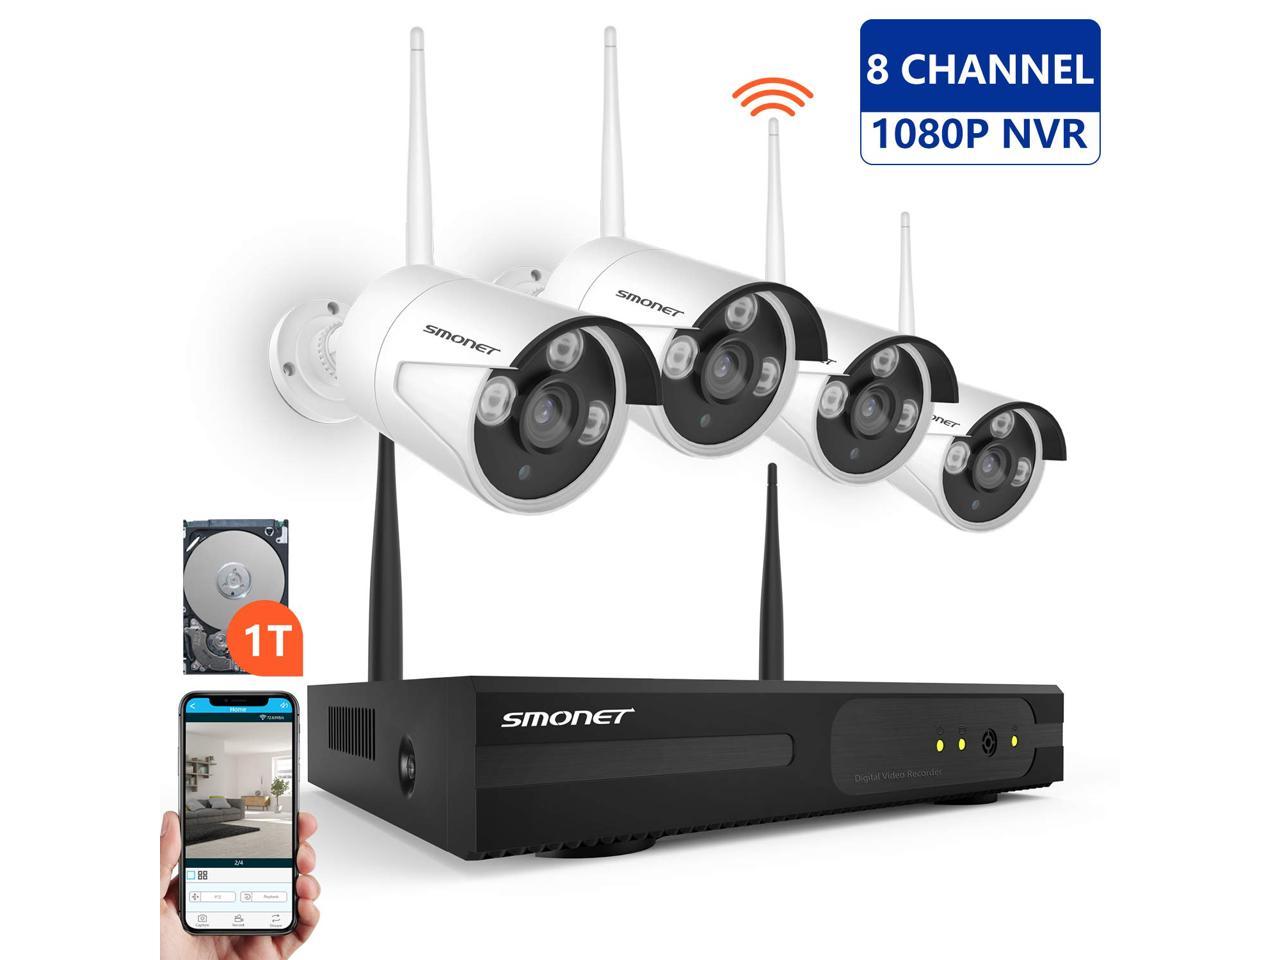 NO HDD 【NEW】Wireless CCTV Camera Systems,SMONET 8CH 1080P Wireless Security Camera System with 10.1 Monitor 4 x960P Waterproof CCTV Bullet Cameras,Free Remote View App,Better Night Vision,Plug&Play